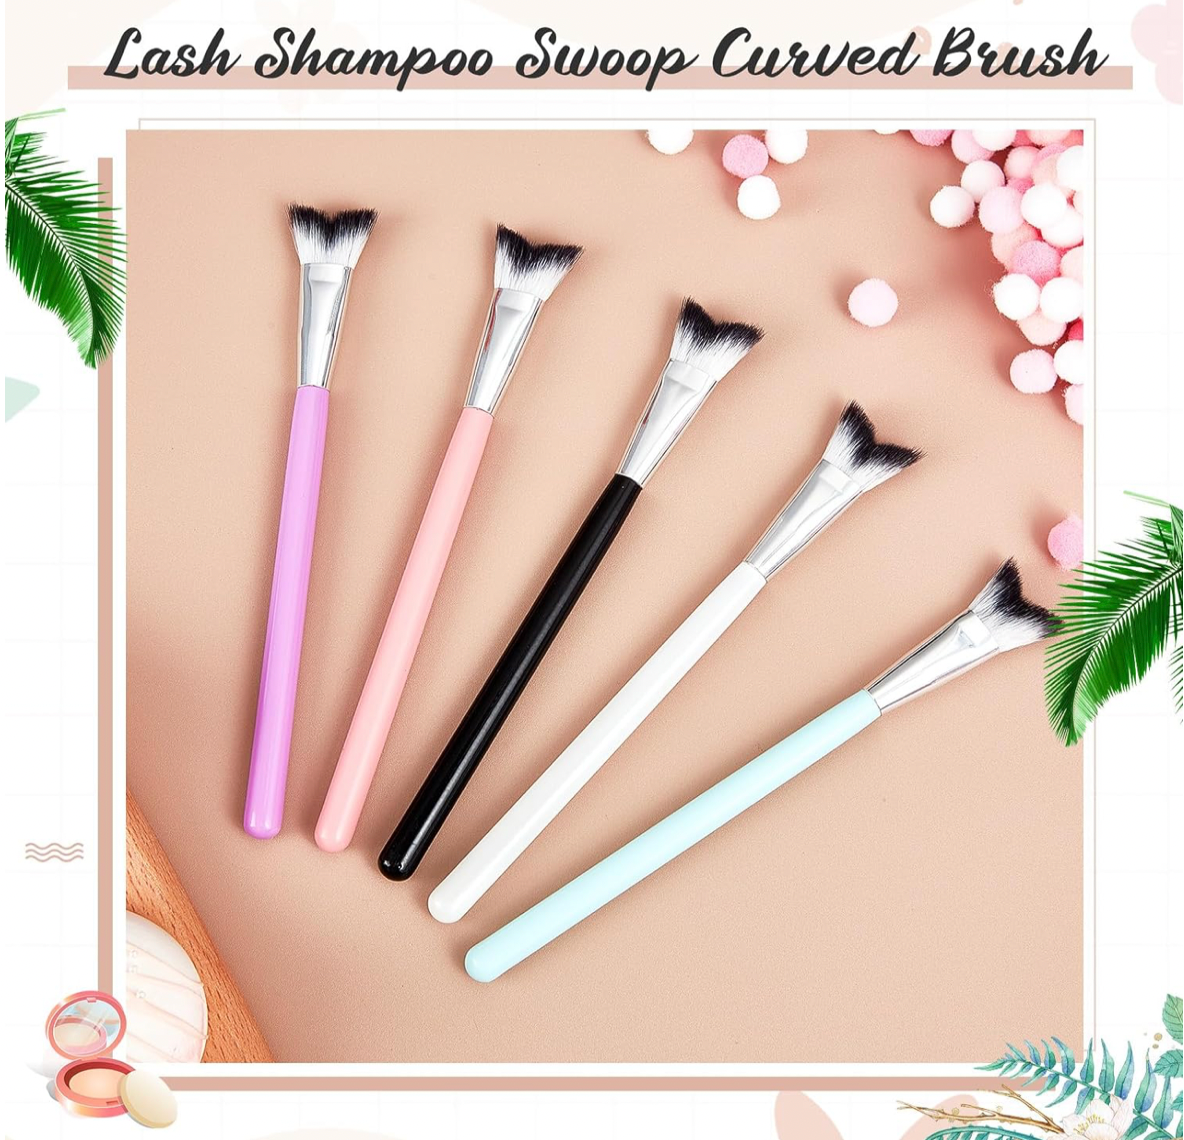 Lash Shampoo Swooped Cleansing Brush